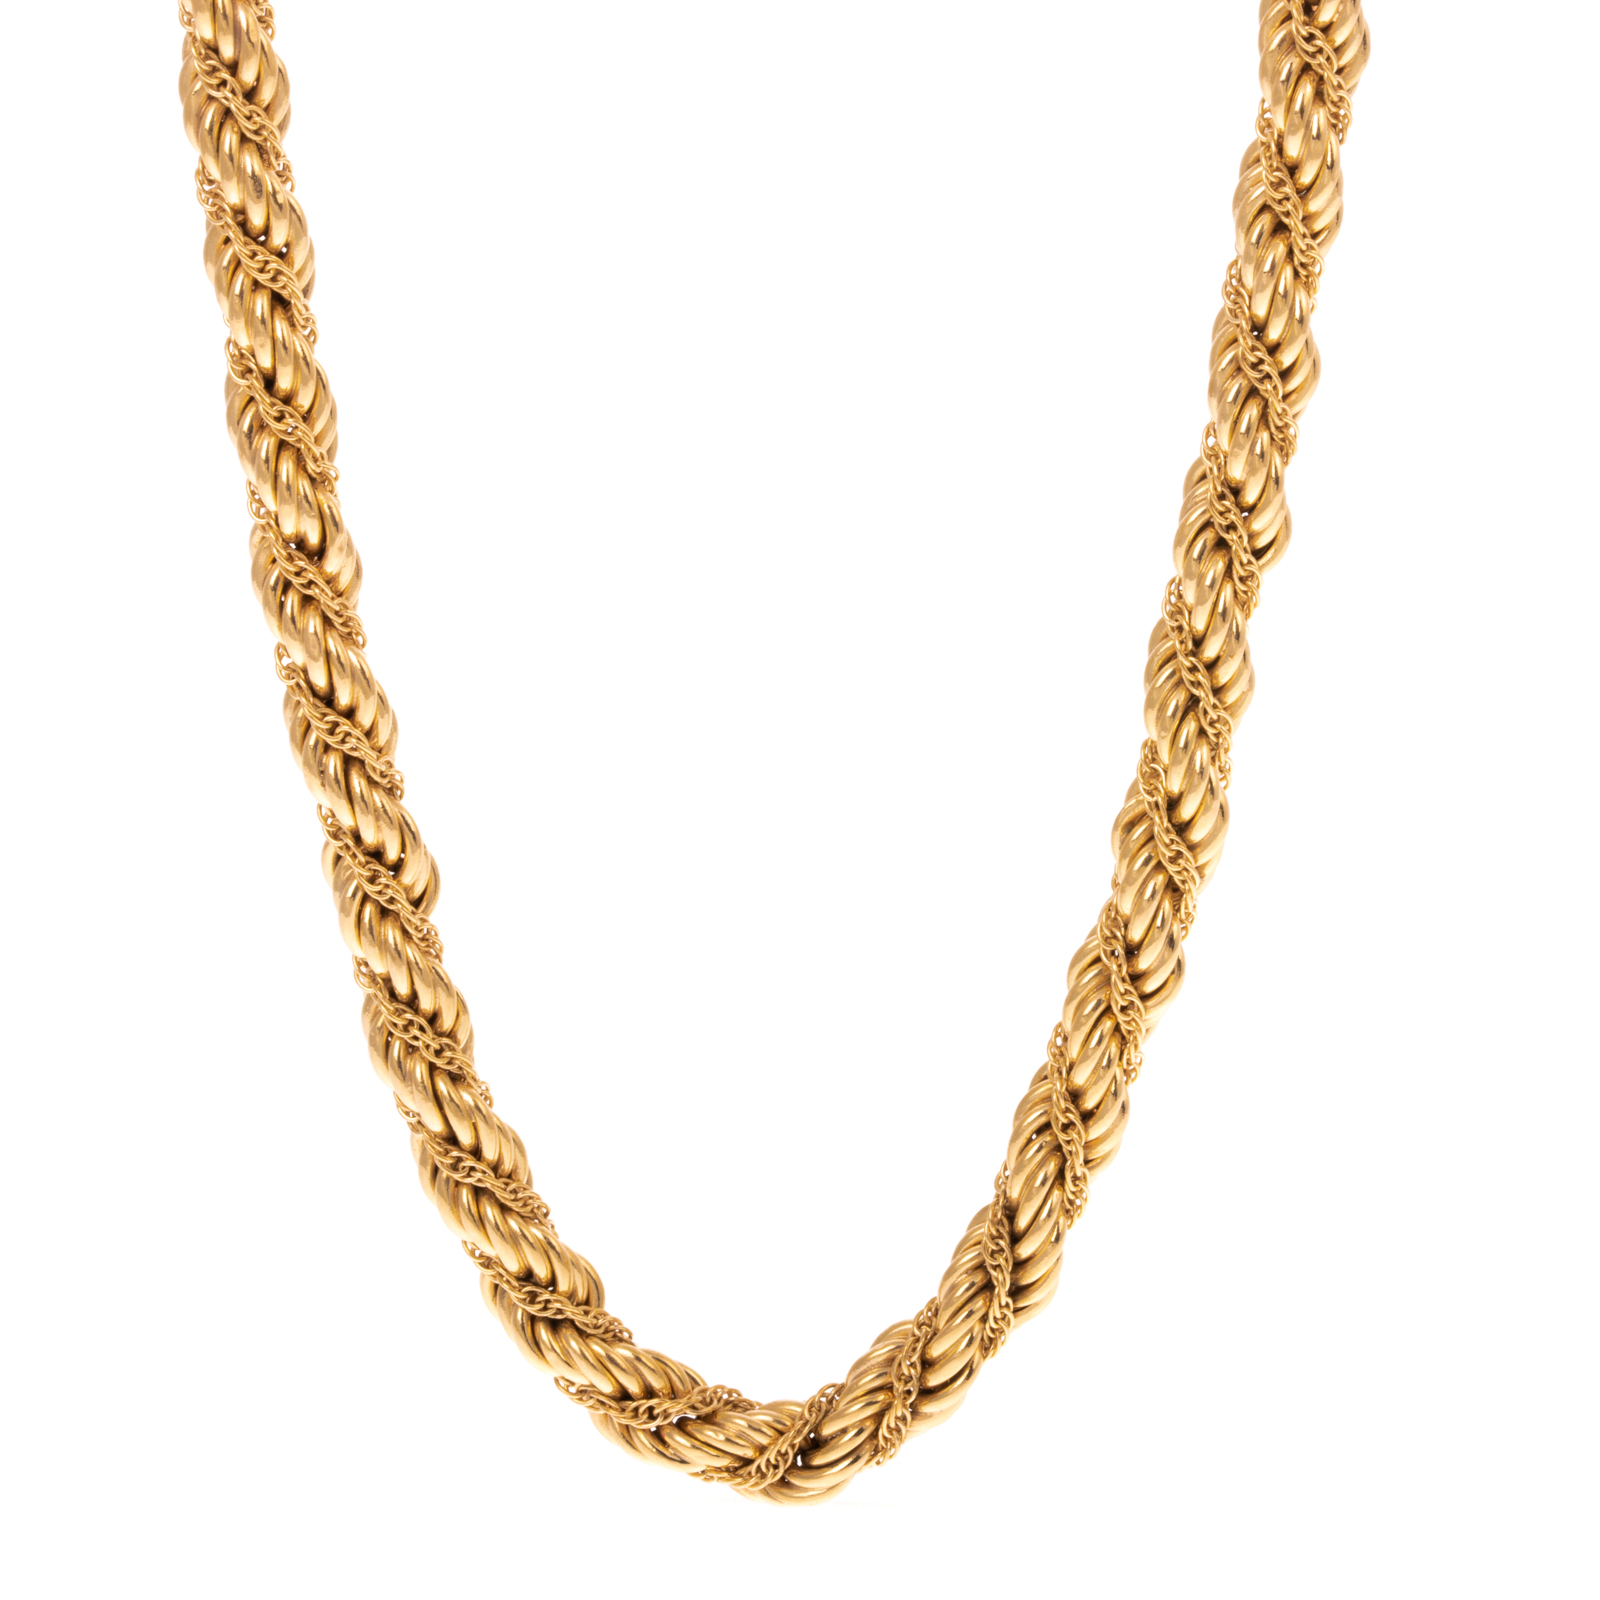 A LONG 14K TWISTED ROPE CHAIN 14K yellow